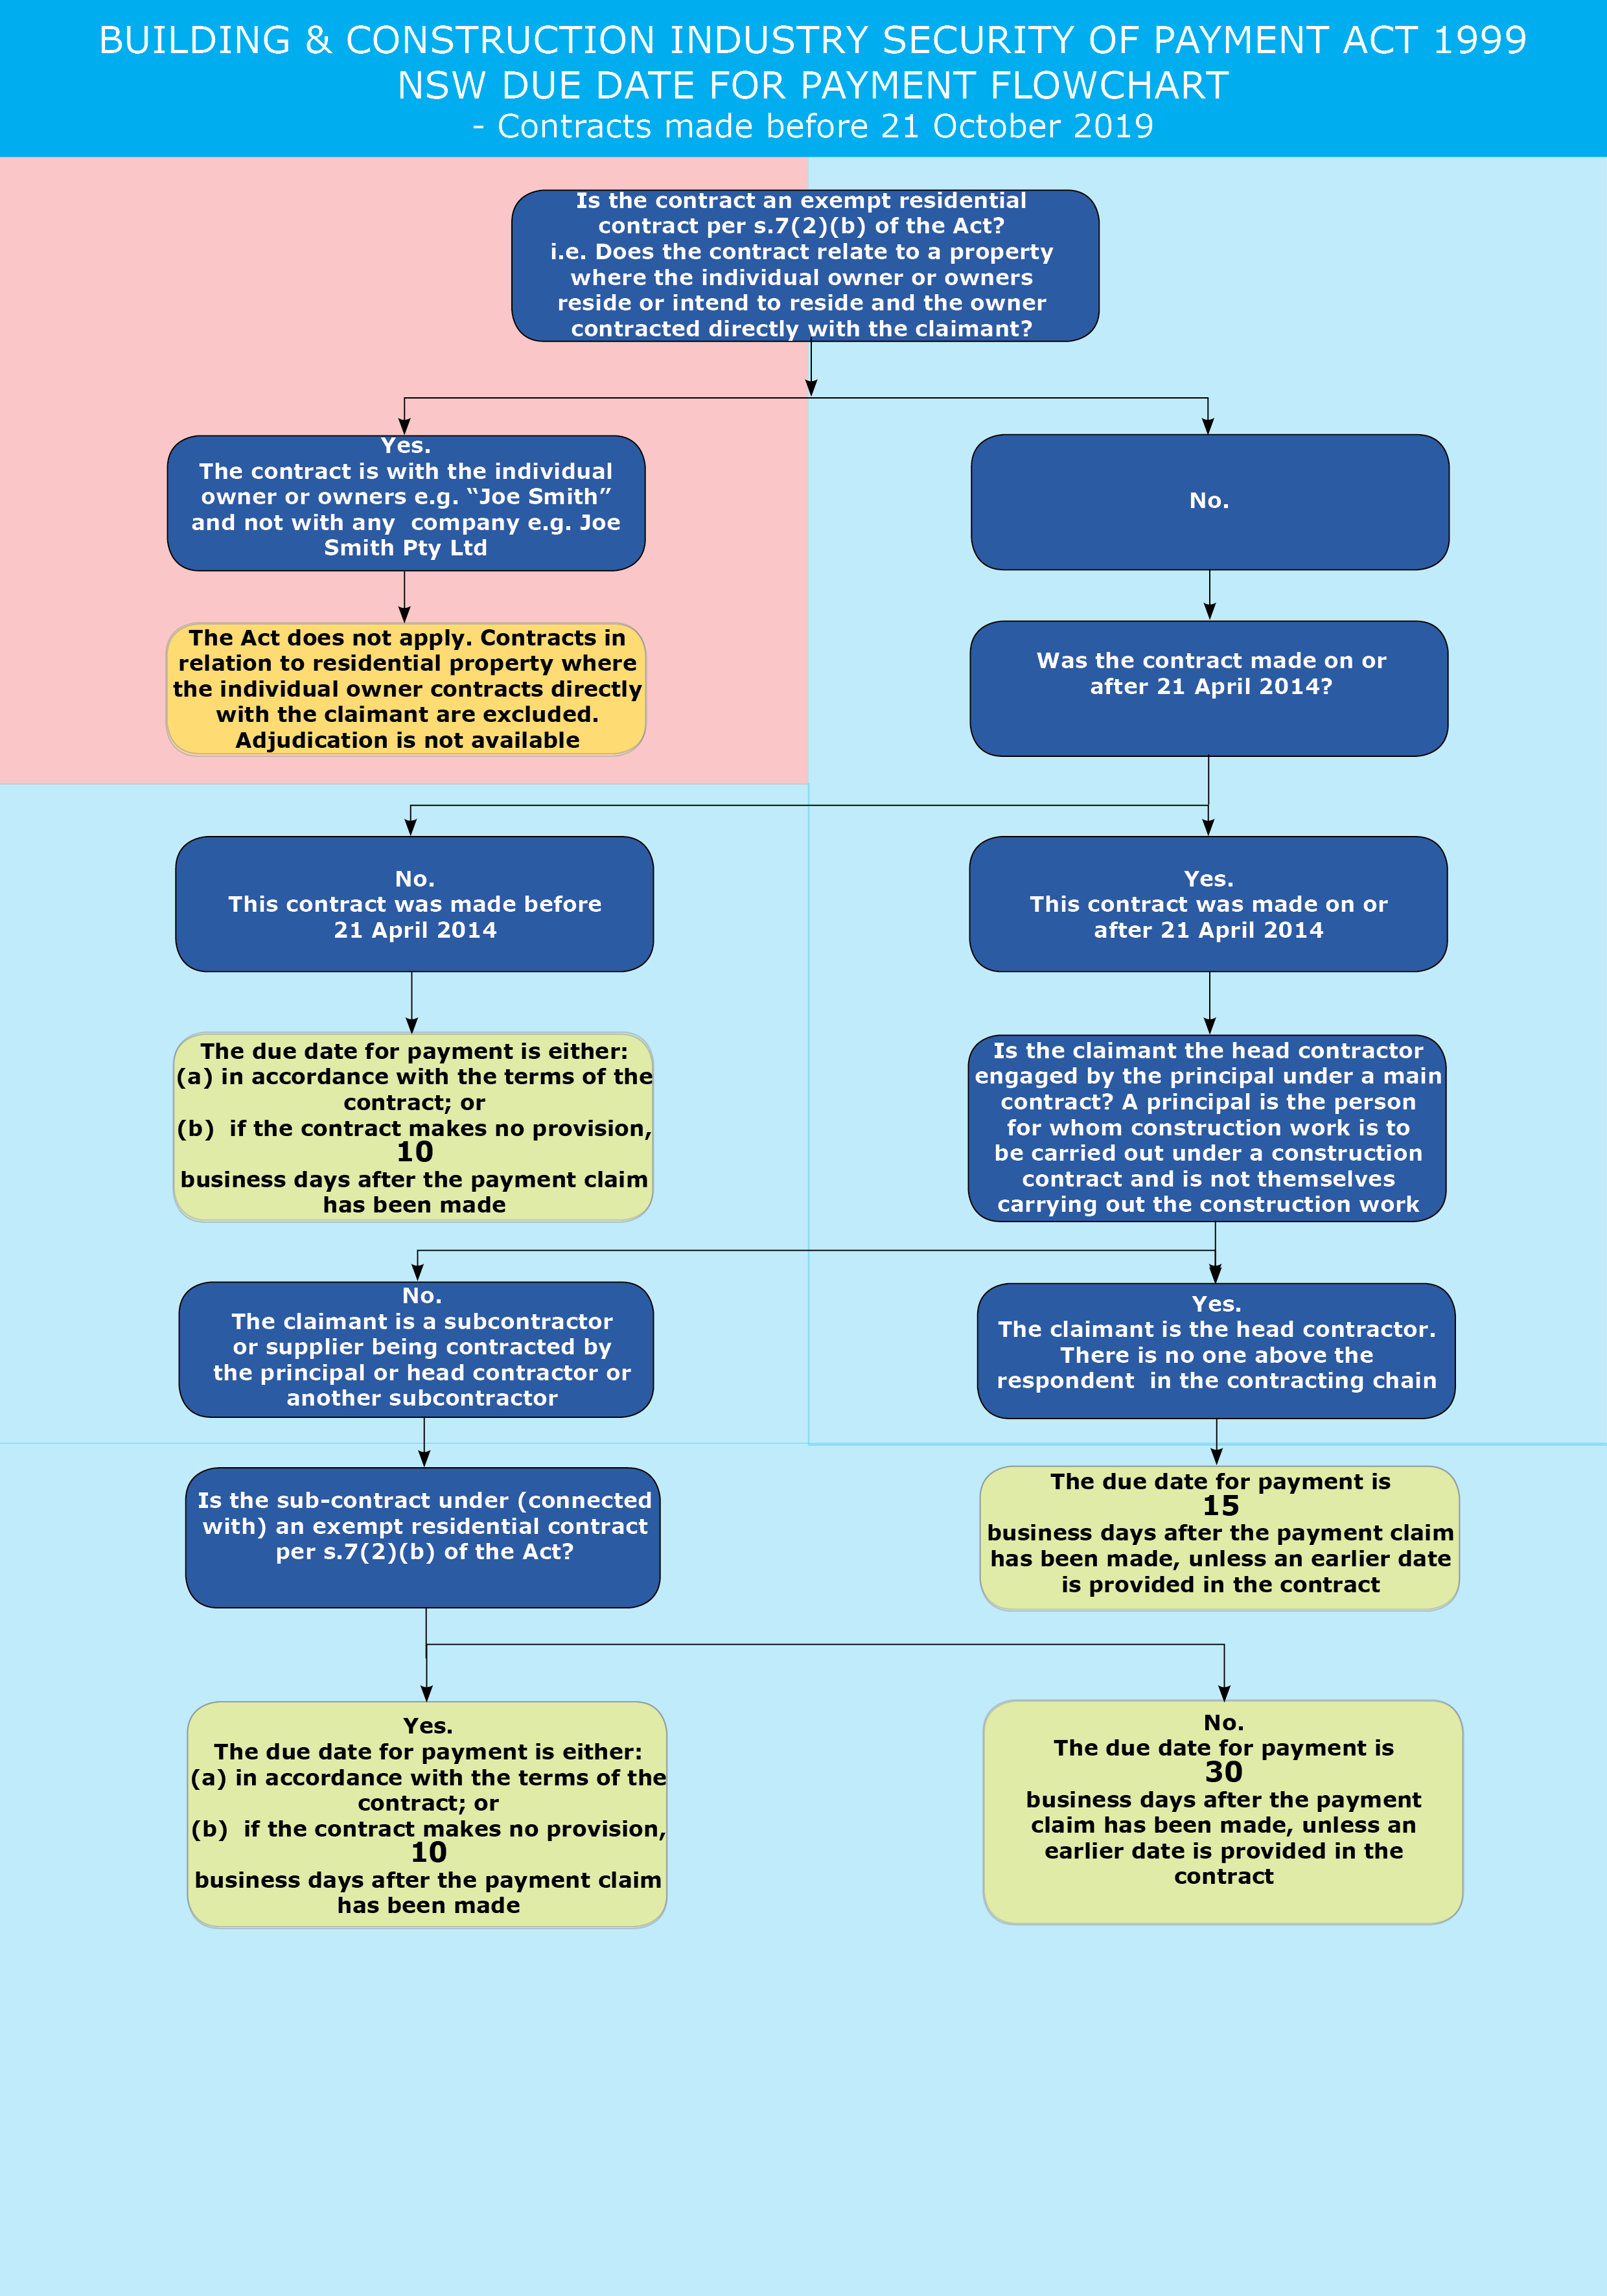 NSW due date for payment flowchart